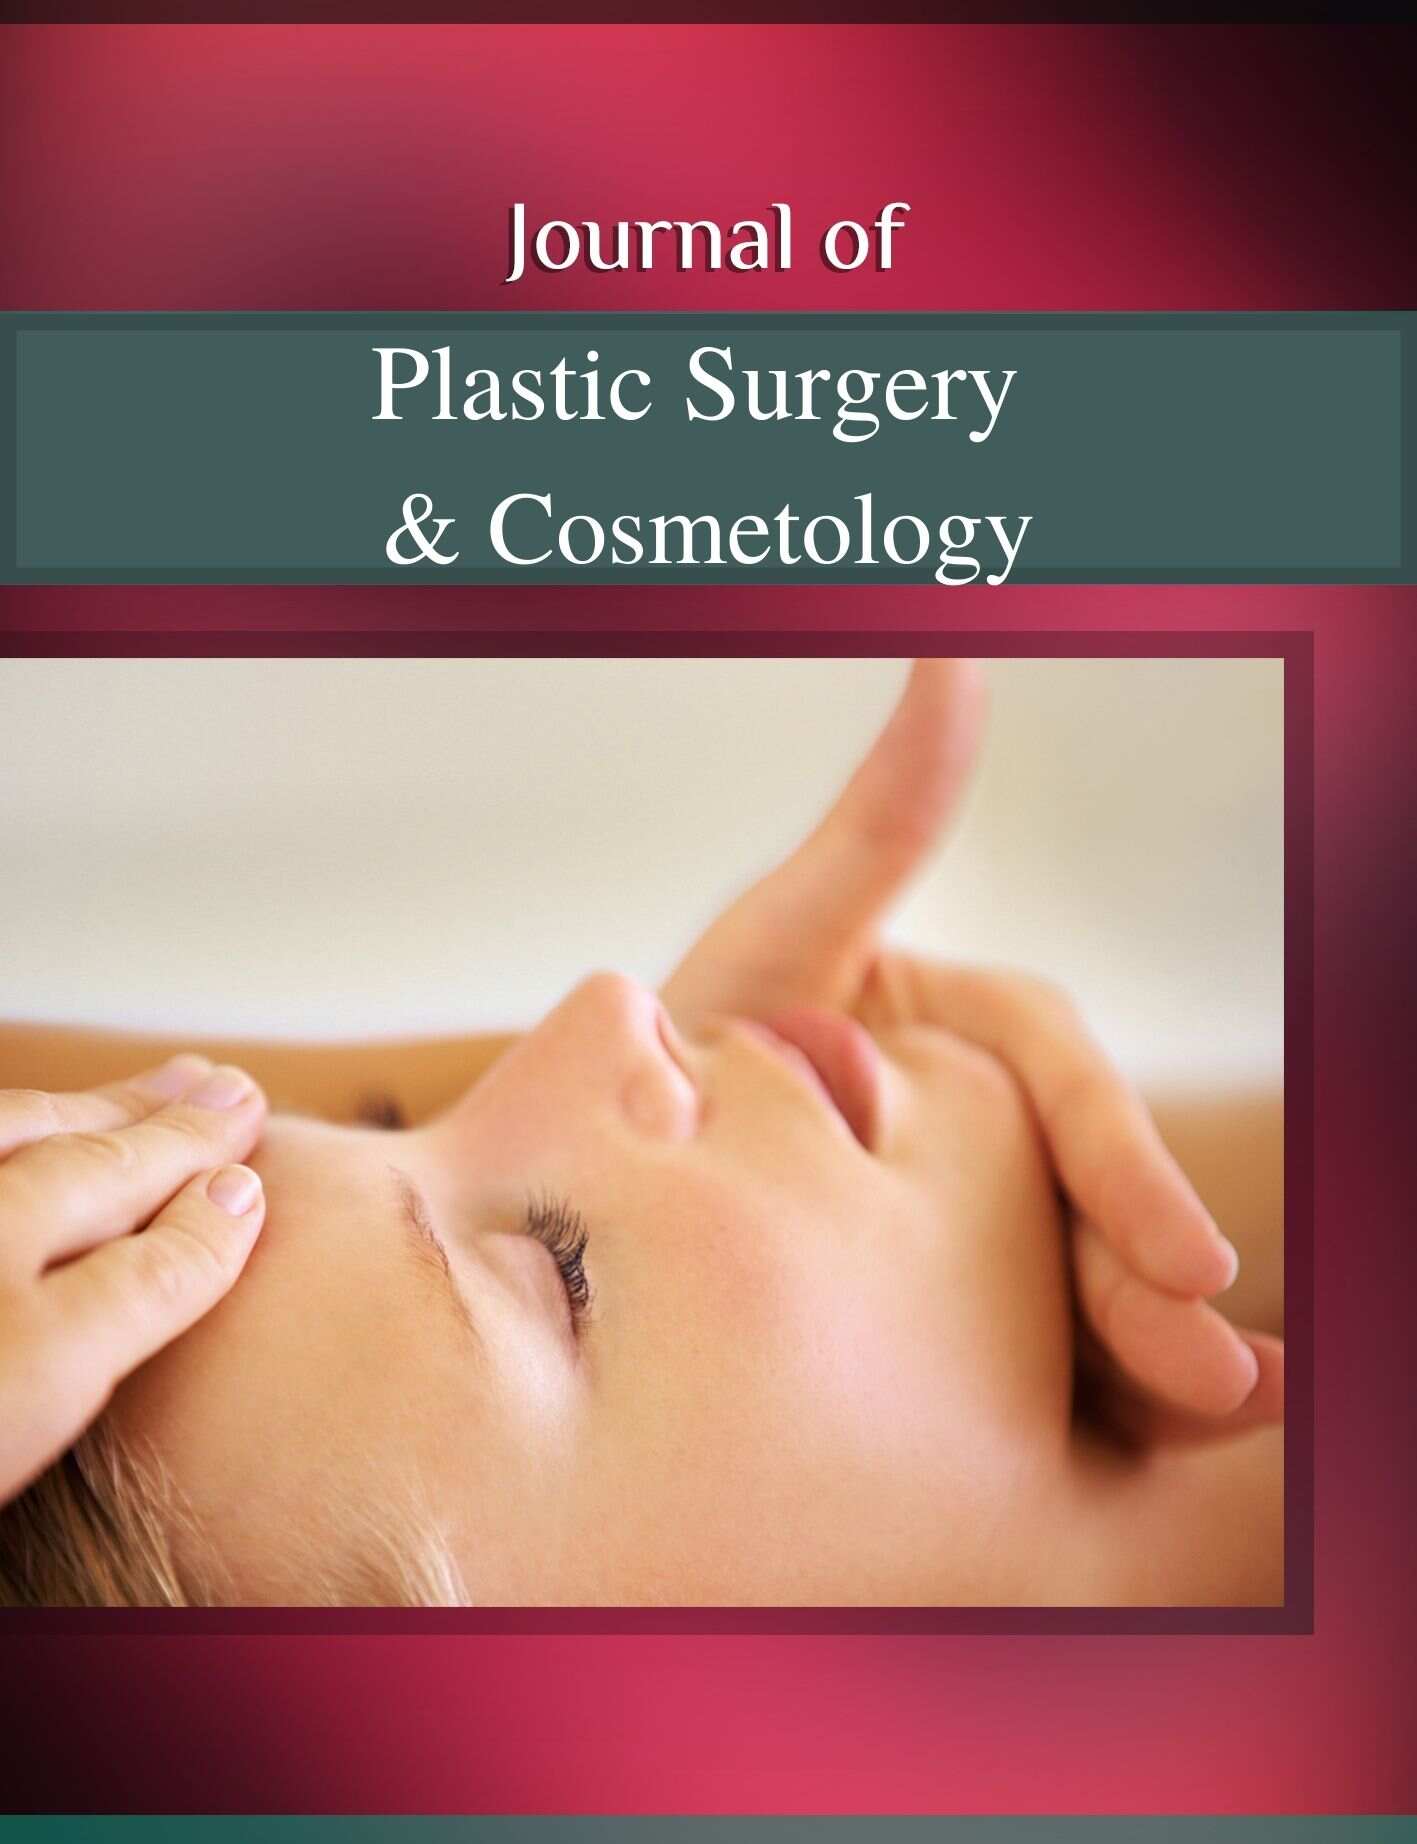 Journal Plastic Surgery and Cosmetology